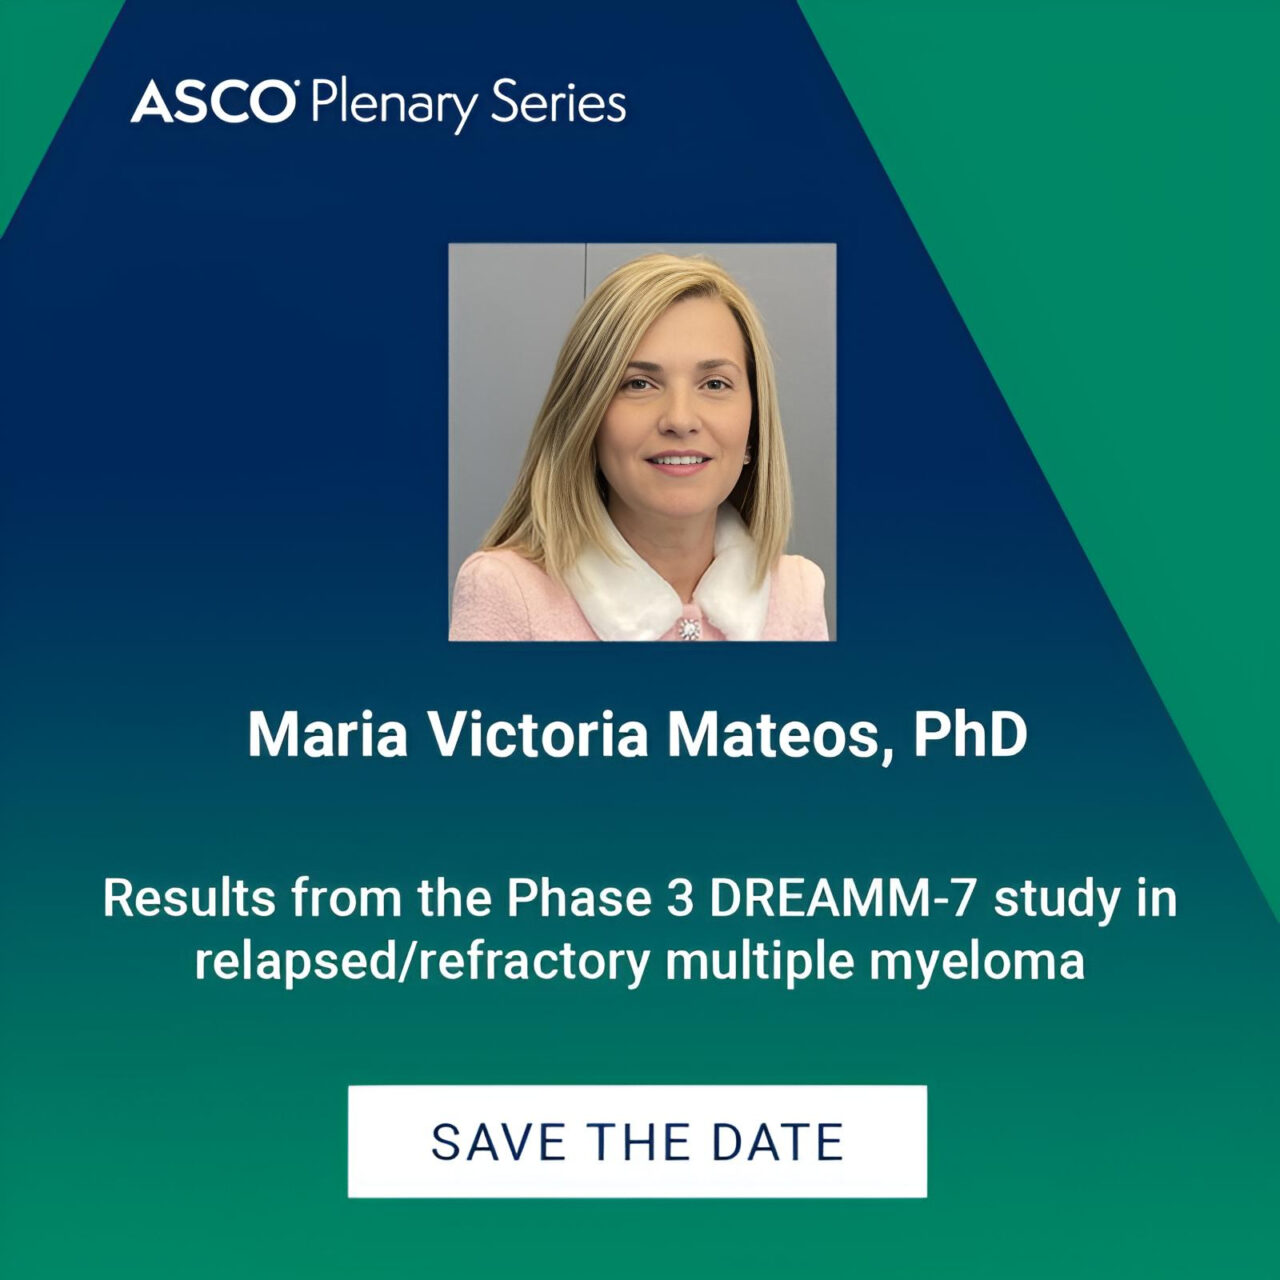 Triplet Therapy Offers New Treatment Option for Patients with Relapsed or Refractory Multiple Myeloma – ASCO